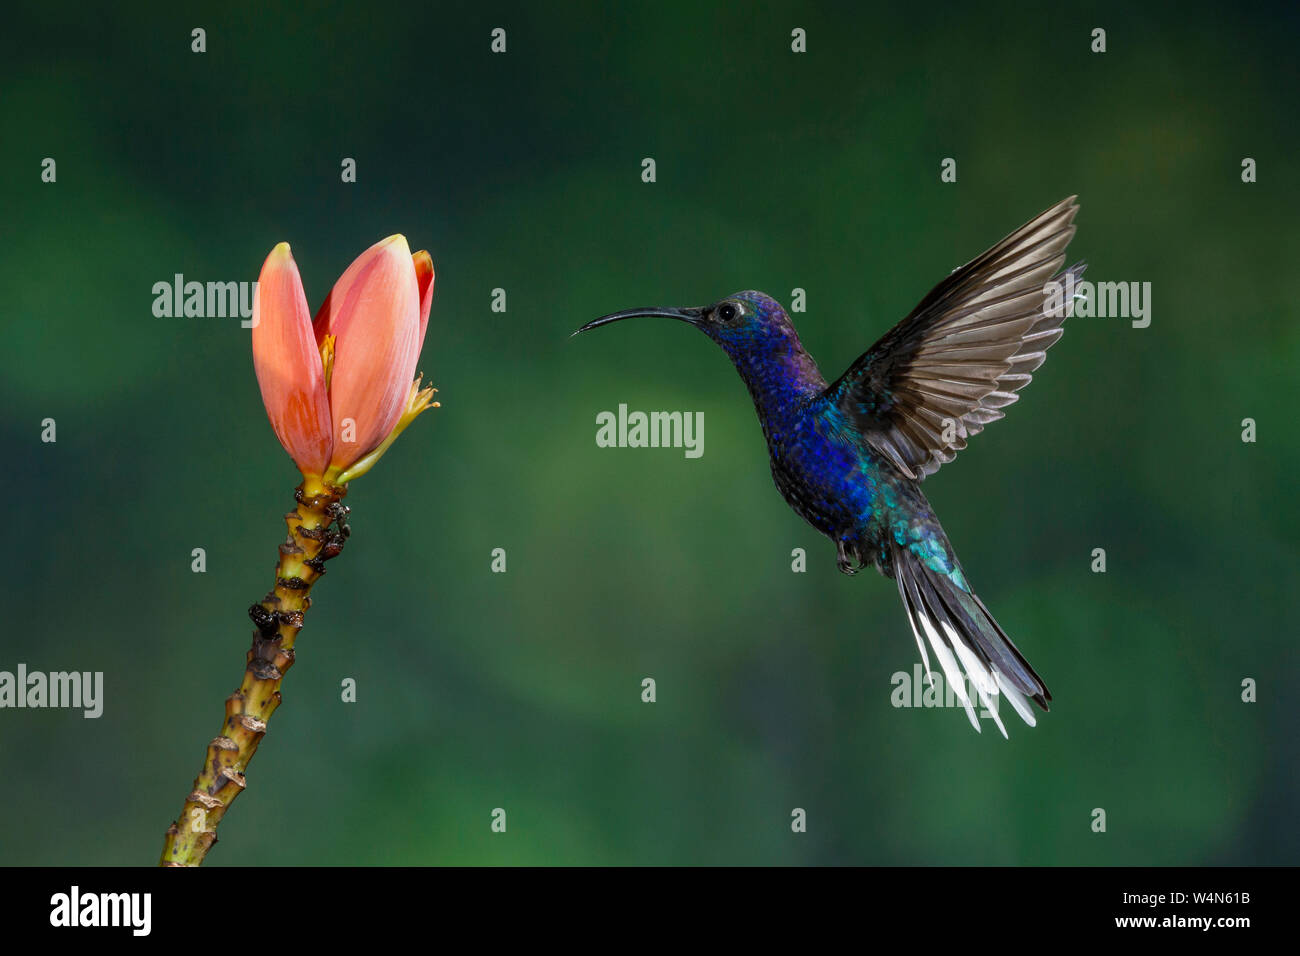 Animals, Bird, Hummingbird, A male Violet Sabrewing Hummingbird, Campylopterus hemileucurus, approaches a tropical banana flower to feed on nectar in Costa Rica. Stock Photo